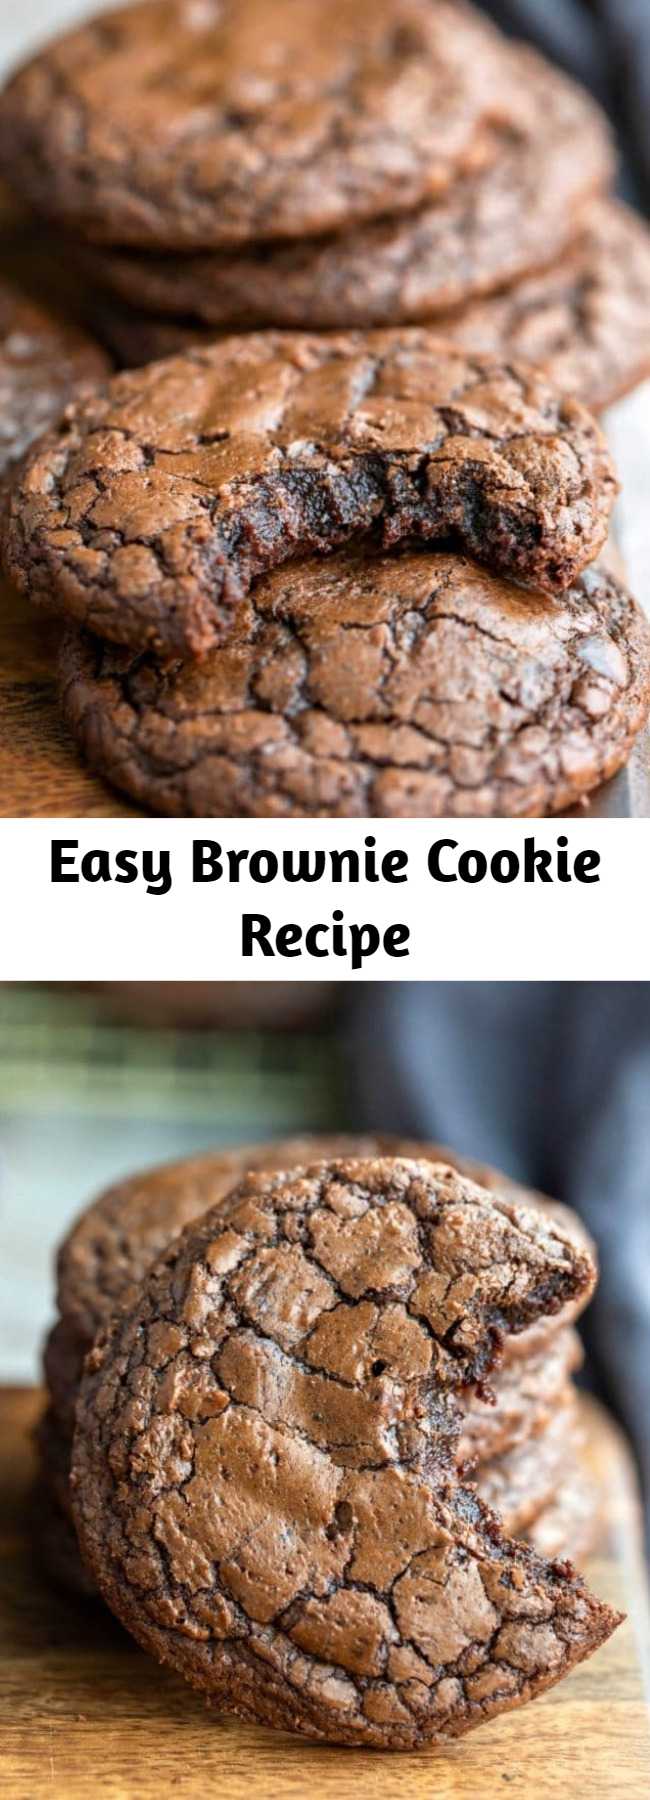 Easy Brownie Cookie Recipe - This brownie cookie recipe is all of the good parts of a brownie- crackly crust, fudgy middles, chewy edges, & intense chocolate flavor -in one easy, homemade cookie recipe. One of the best cookie recipes around!